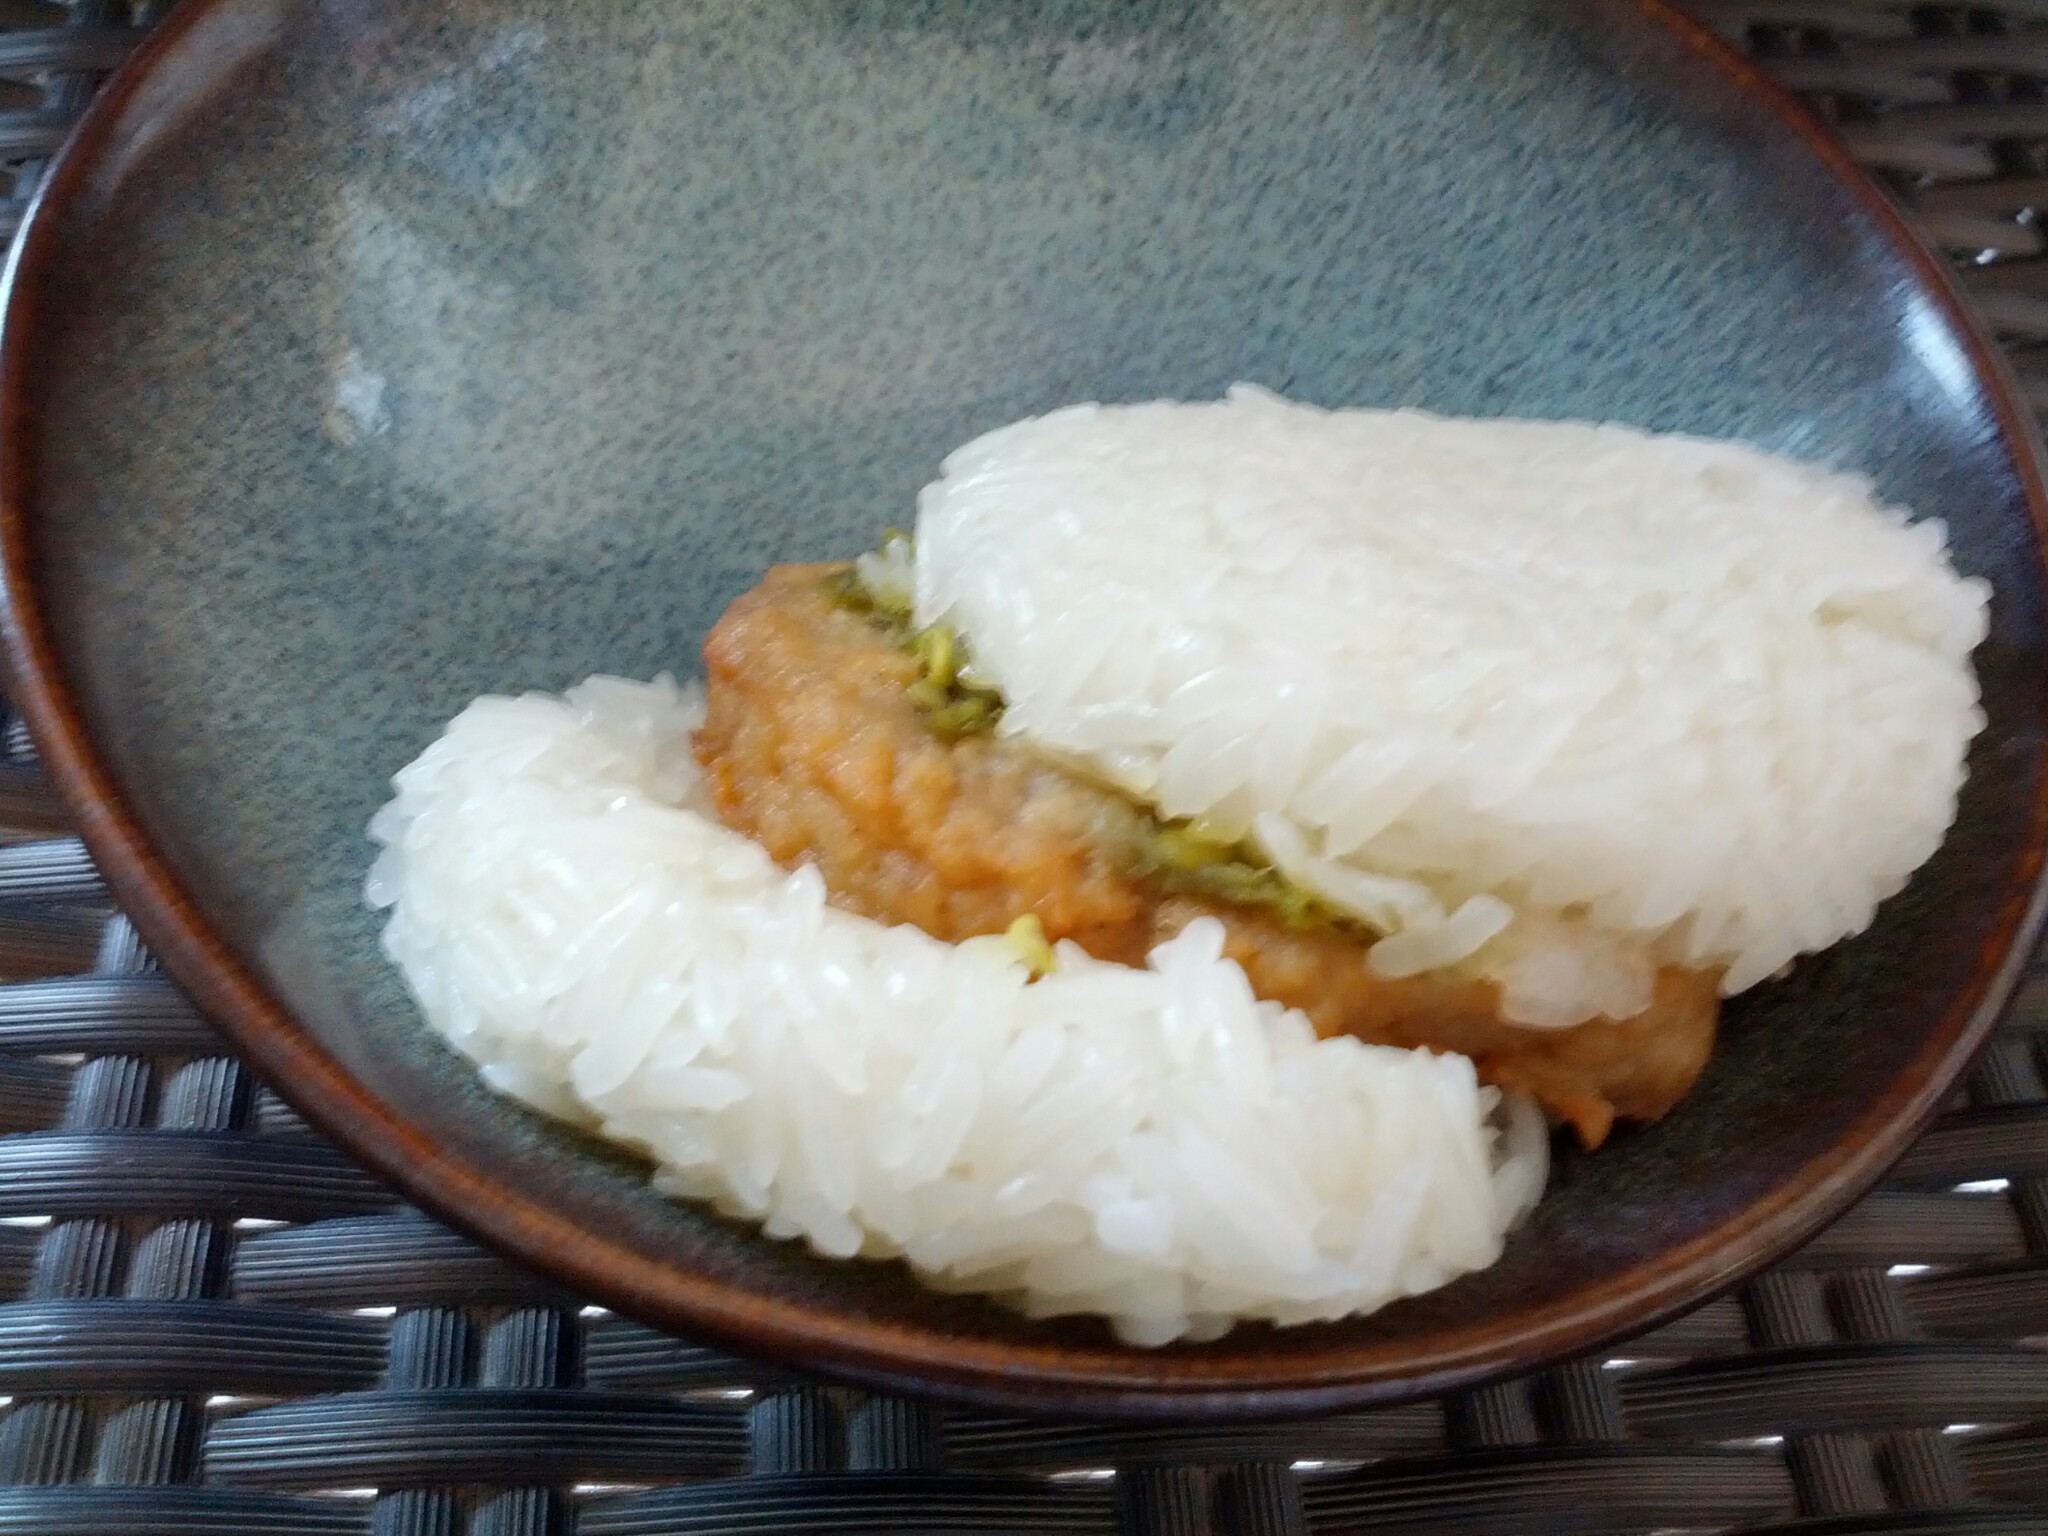 rice is piled high on a plate to make a dish